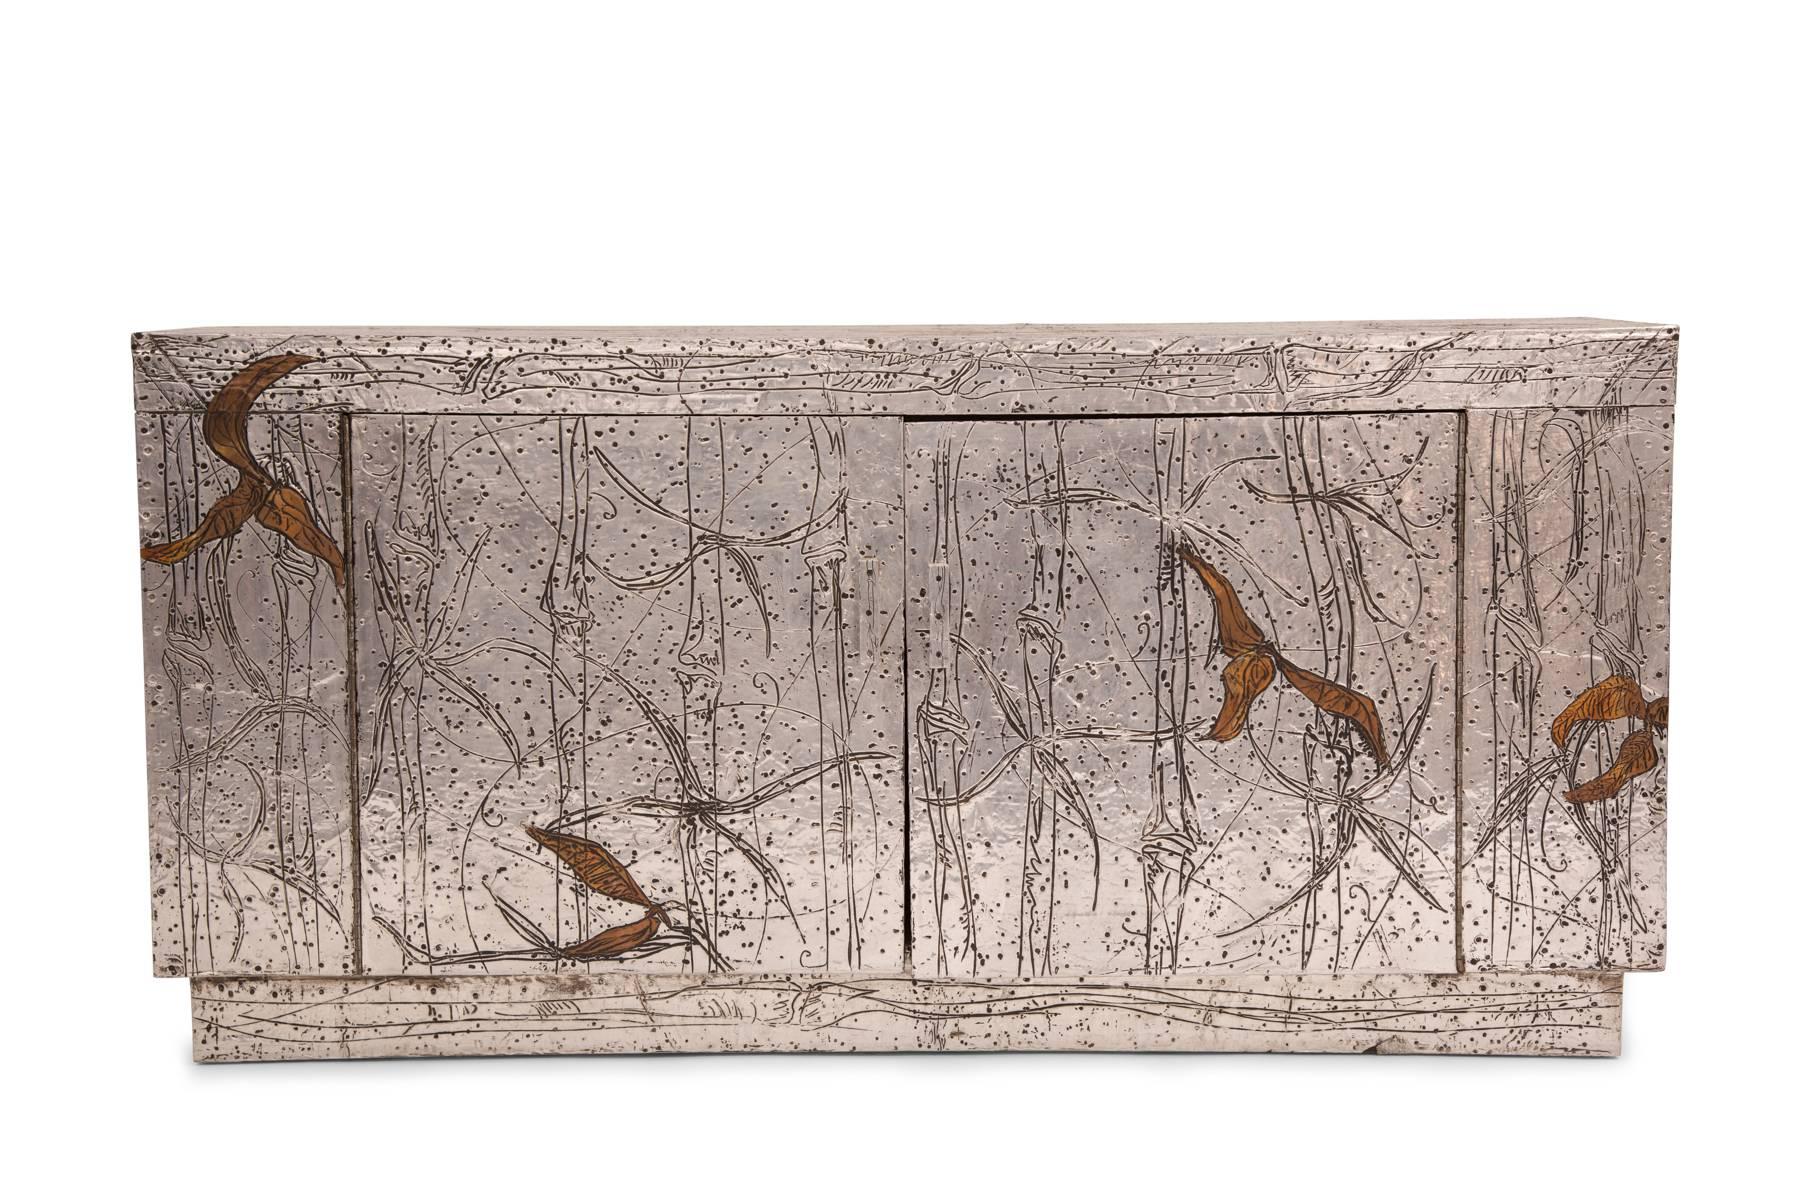 Arenson studios aluminum and copper credenza or chest, circa late 1950s. This extraordinary example employs hammered and etched aluminum and copper over a wood structure. It is signed on the top and back.